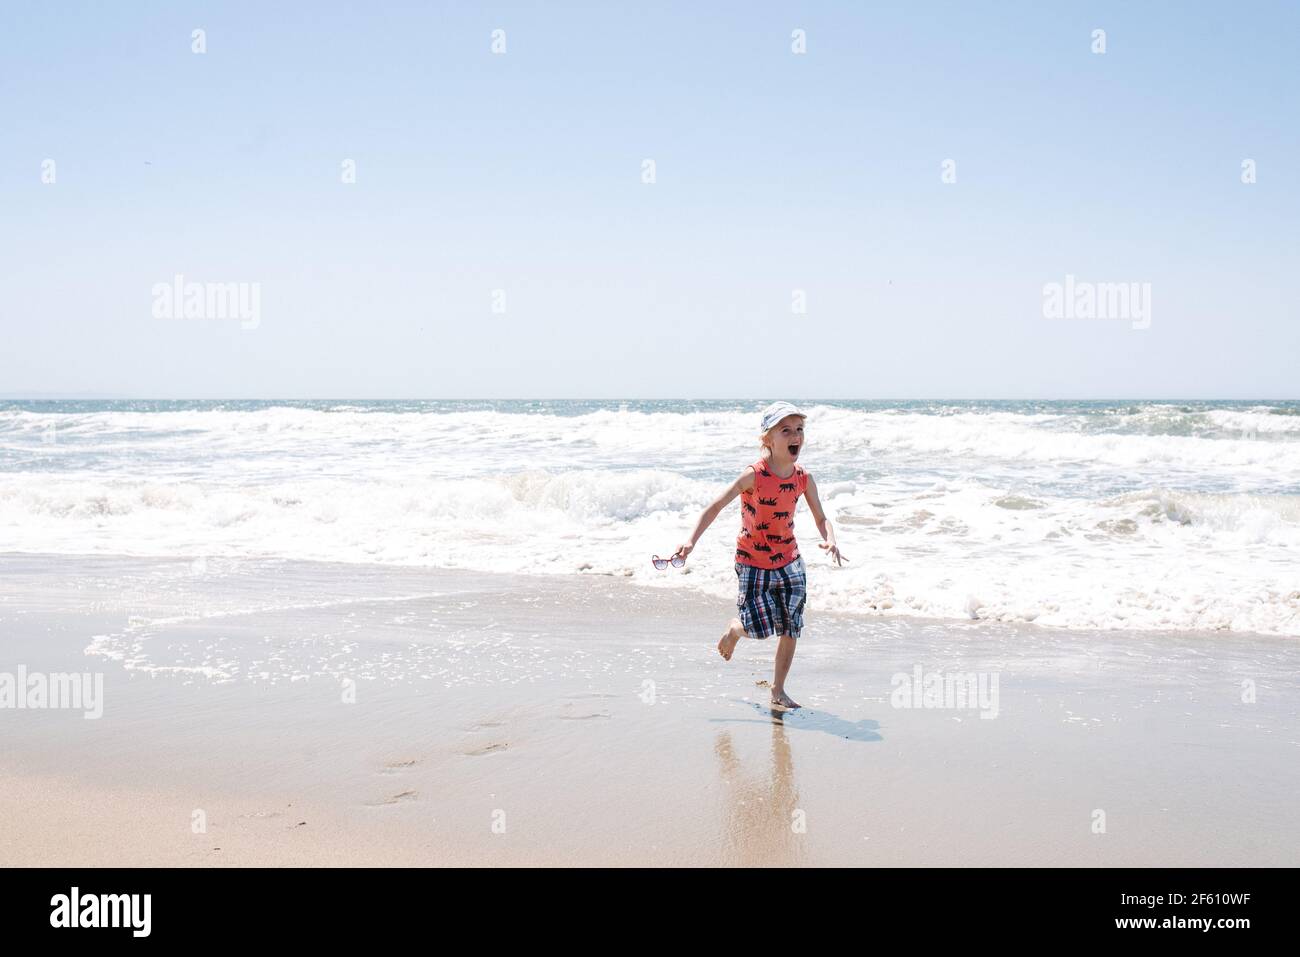 Boy by the sea, running from waves Stock Photo